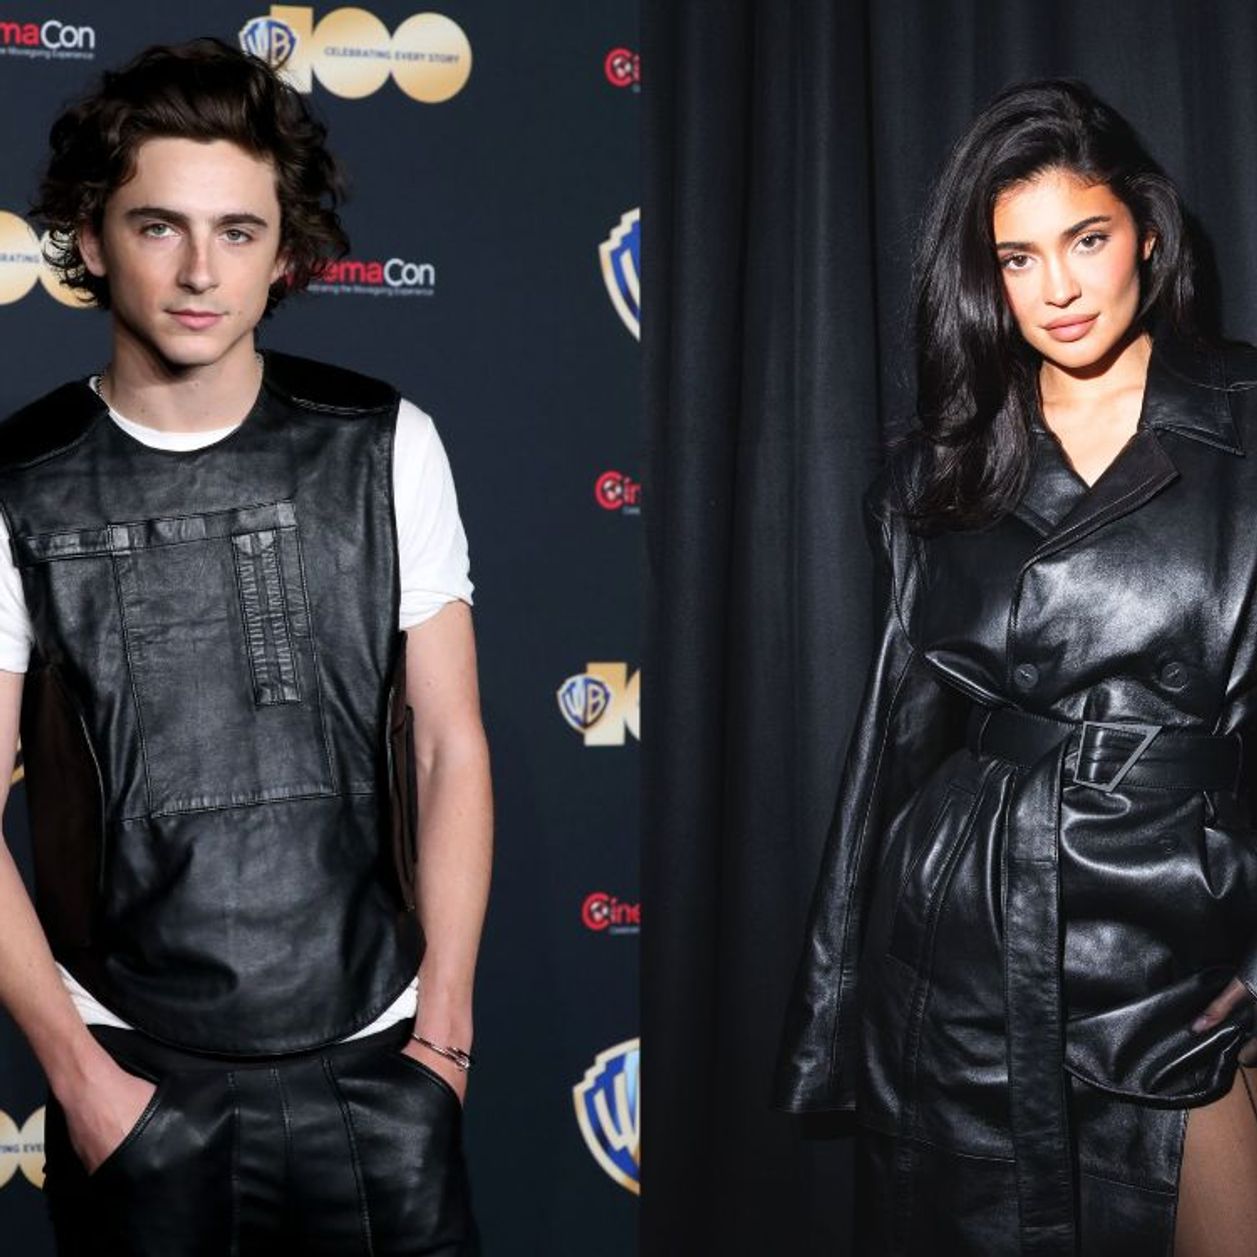 Kylie Jenner and Timothée Chalamet continue to fuel romance rumors